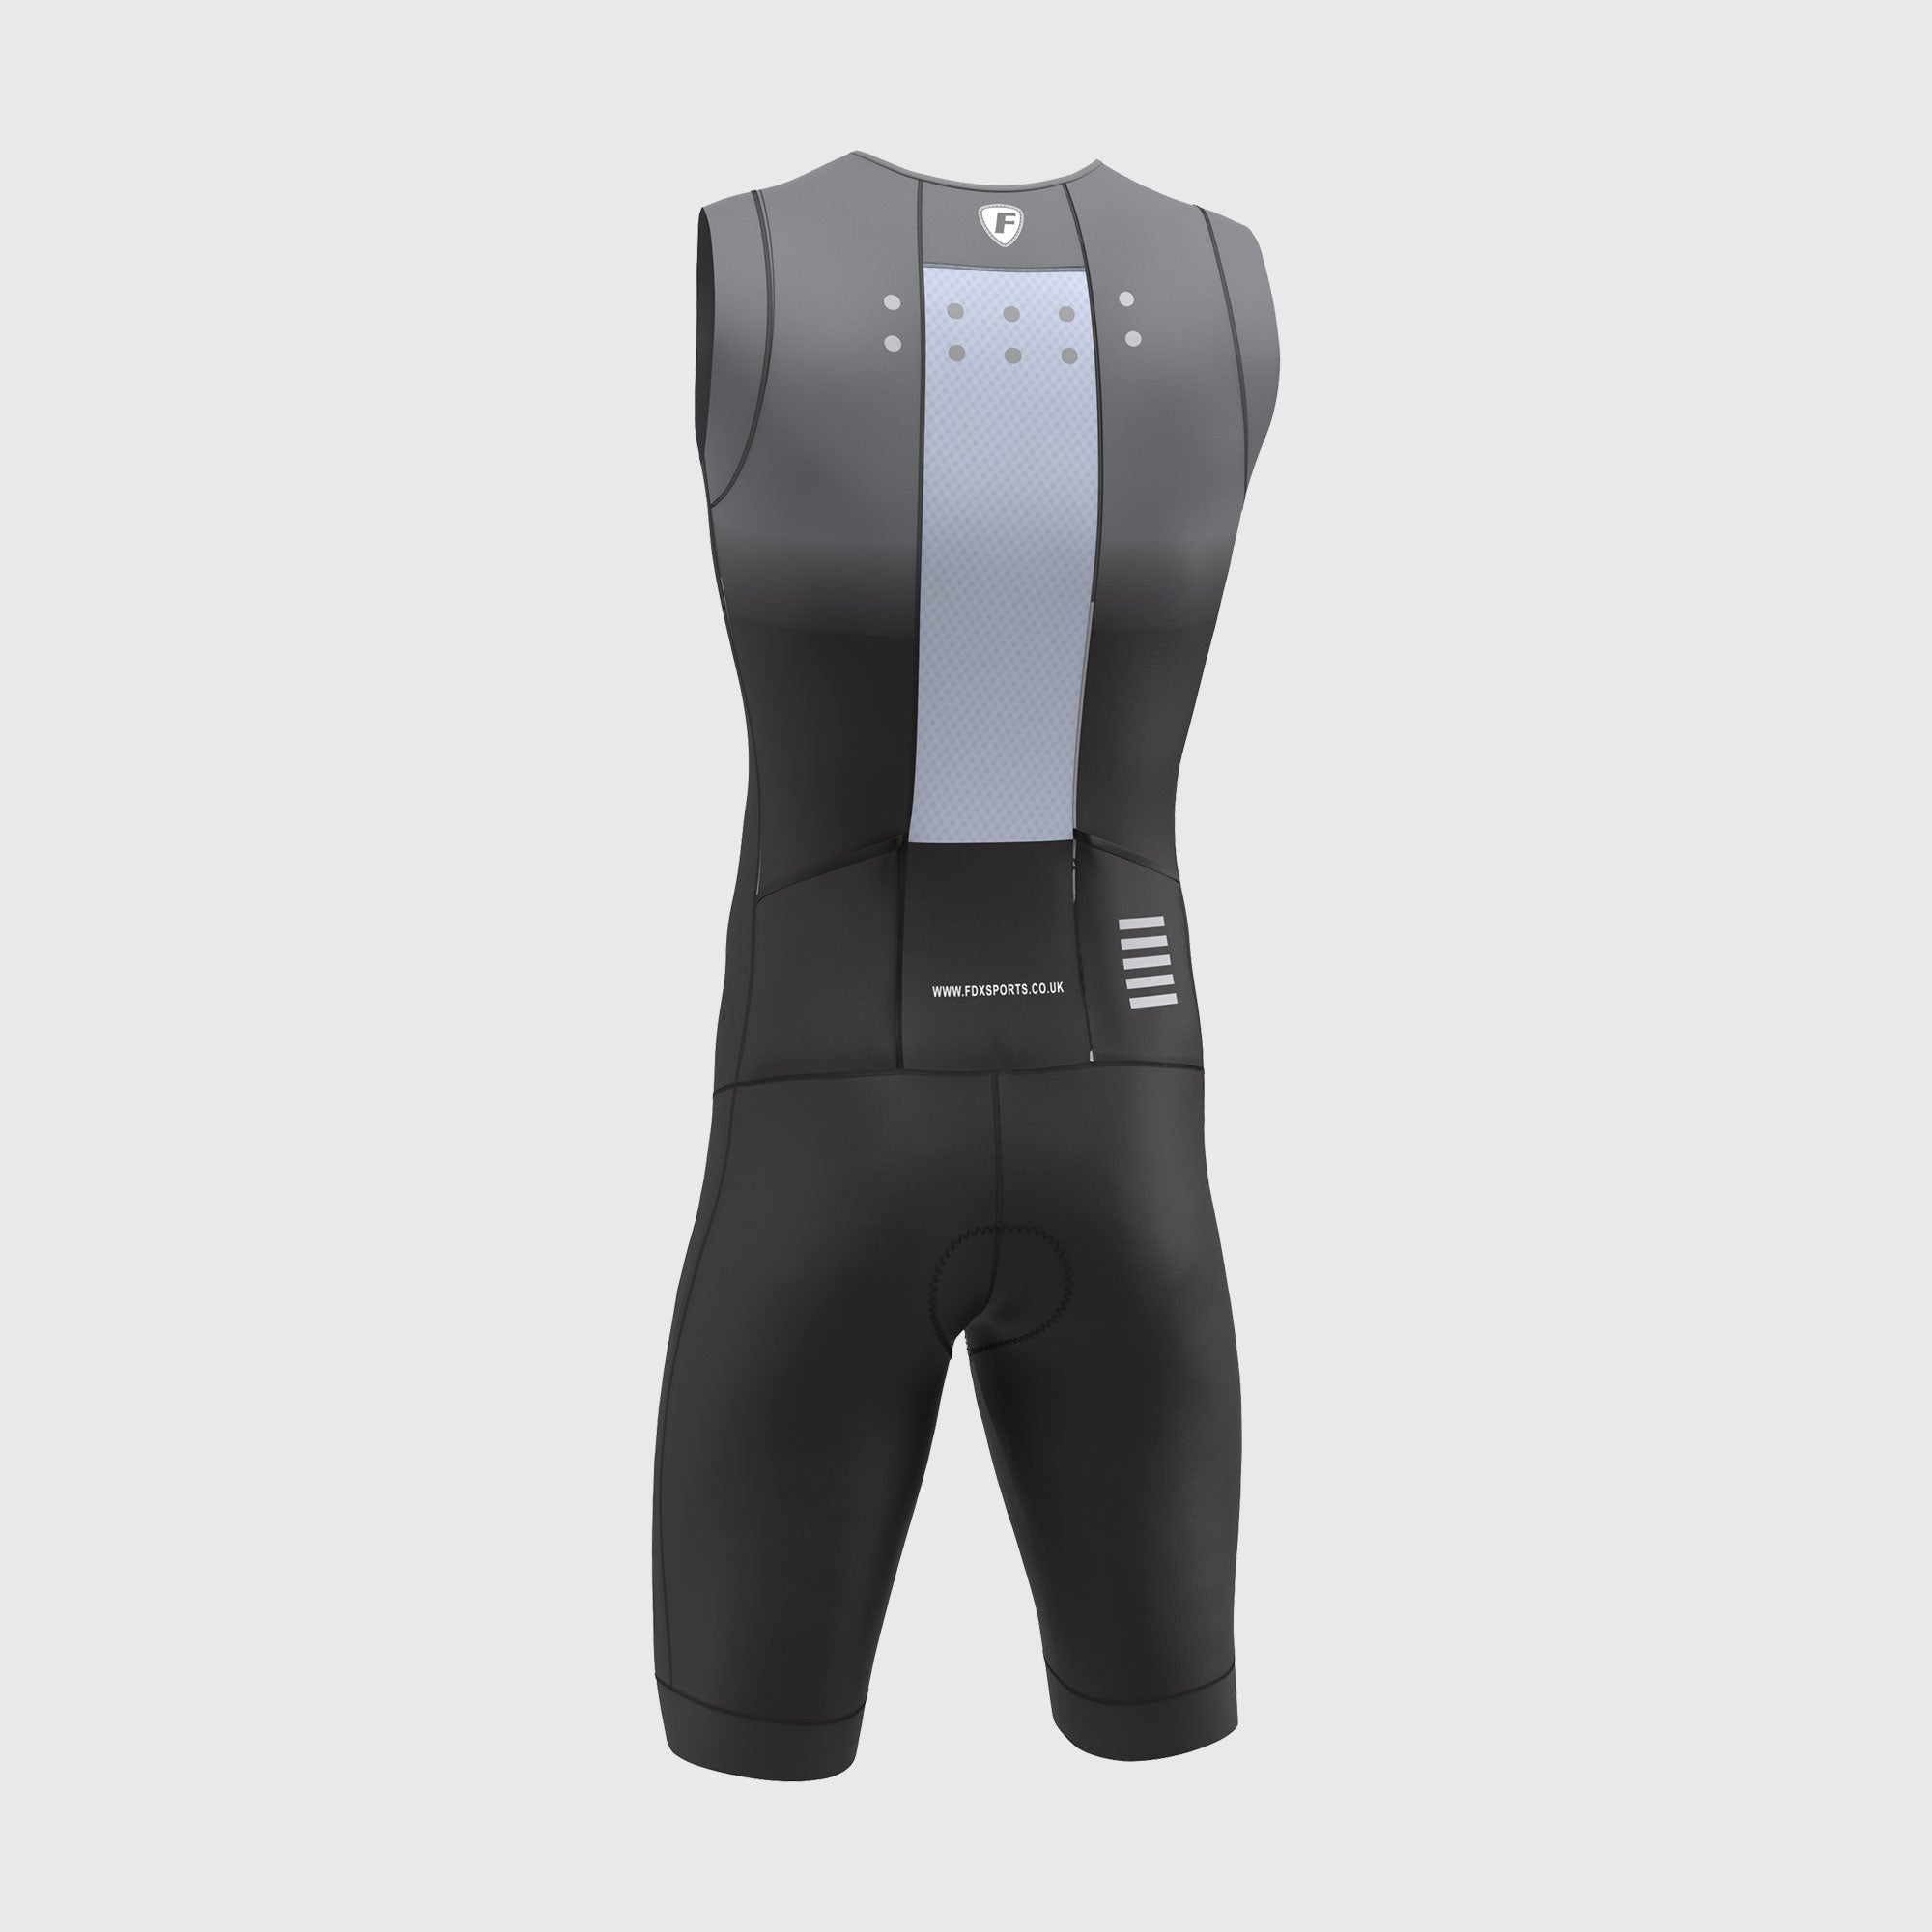 FDX Men’s Black & Gray Triathlon Suit, 3D Padded Breathable Compression Cycling Tri suit with Sleeveless One Piece Skinsuit for Racing, Training, Running